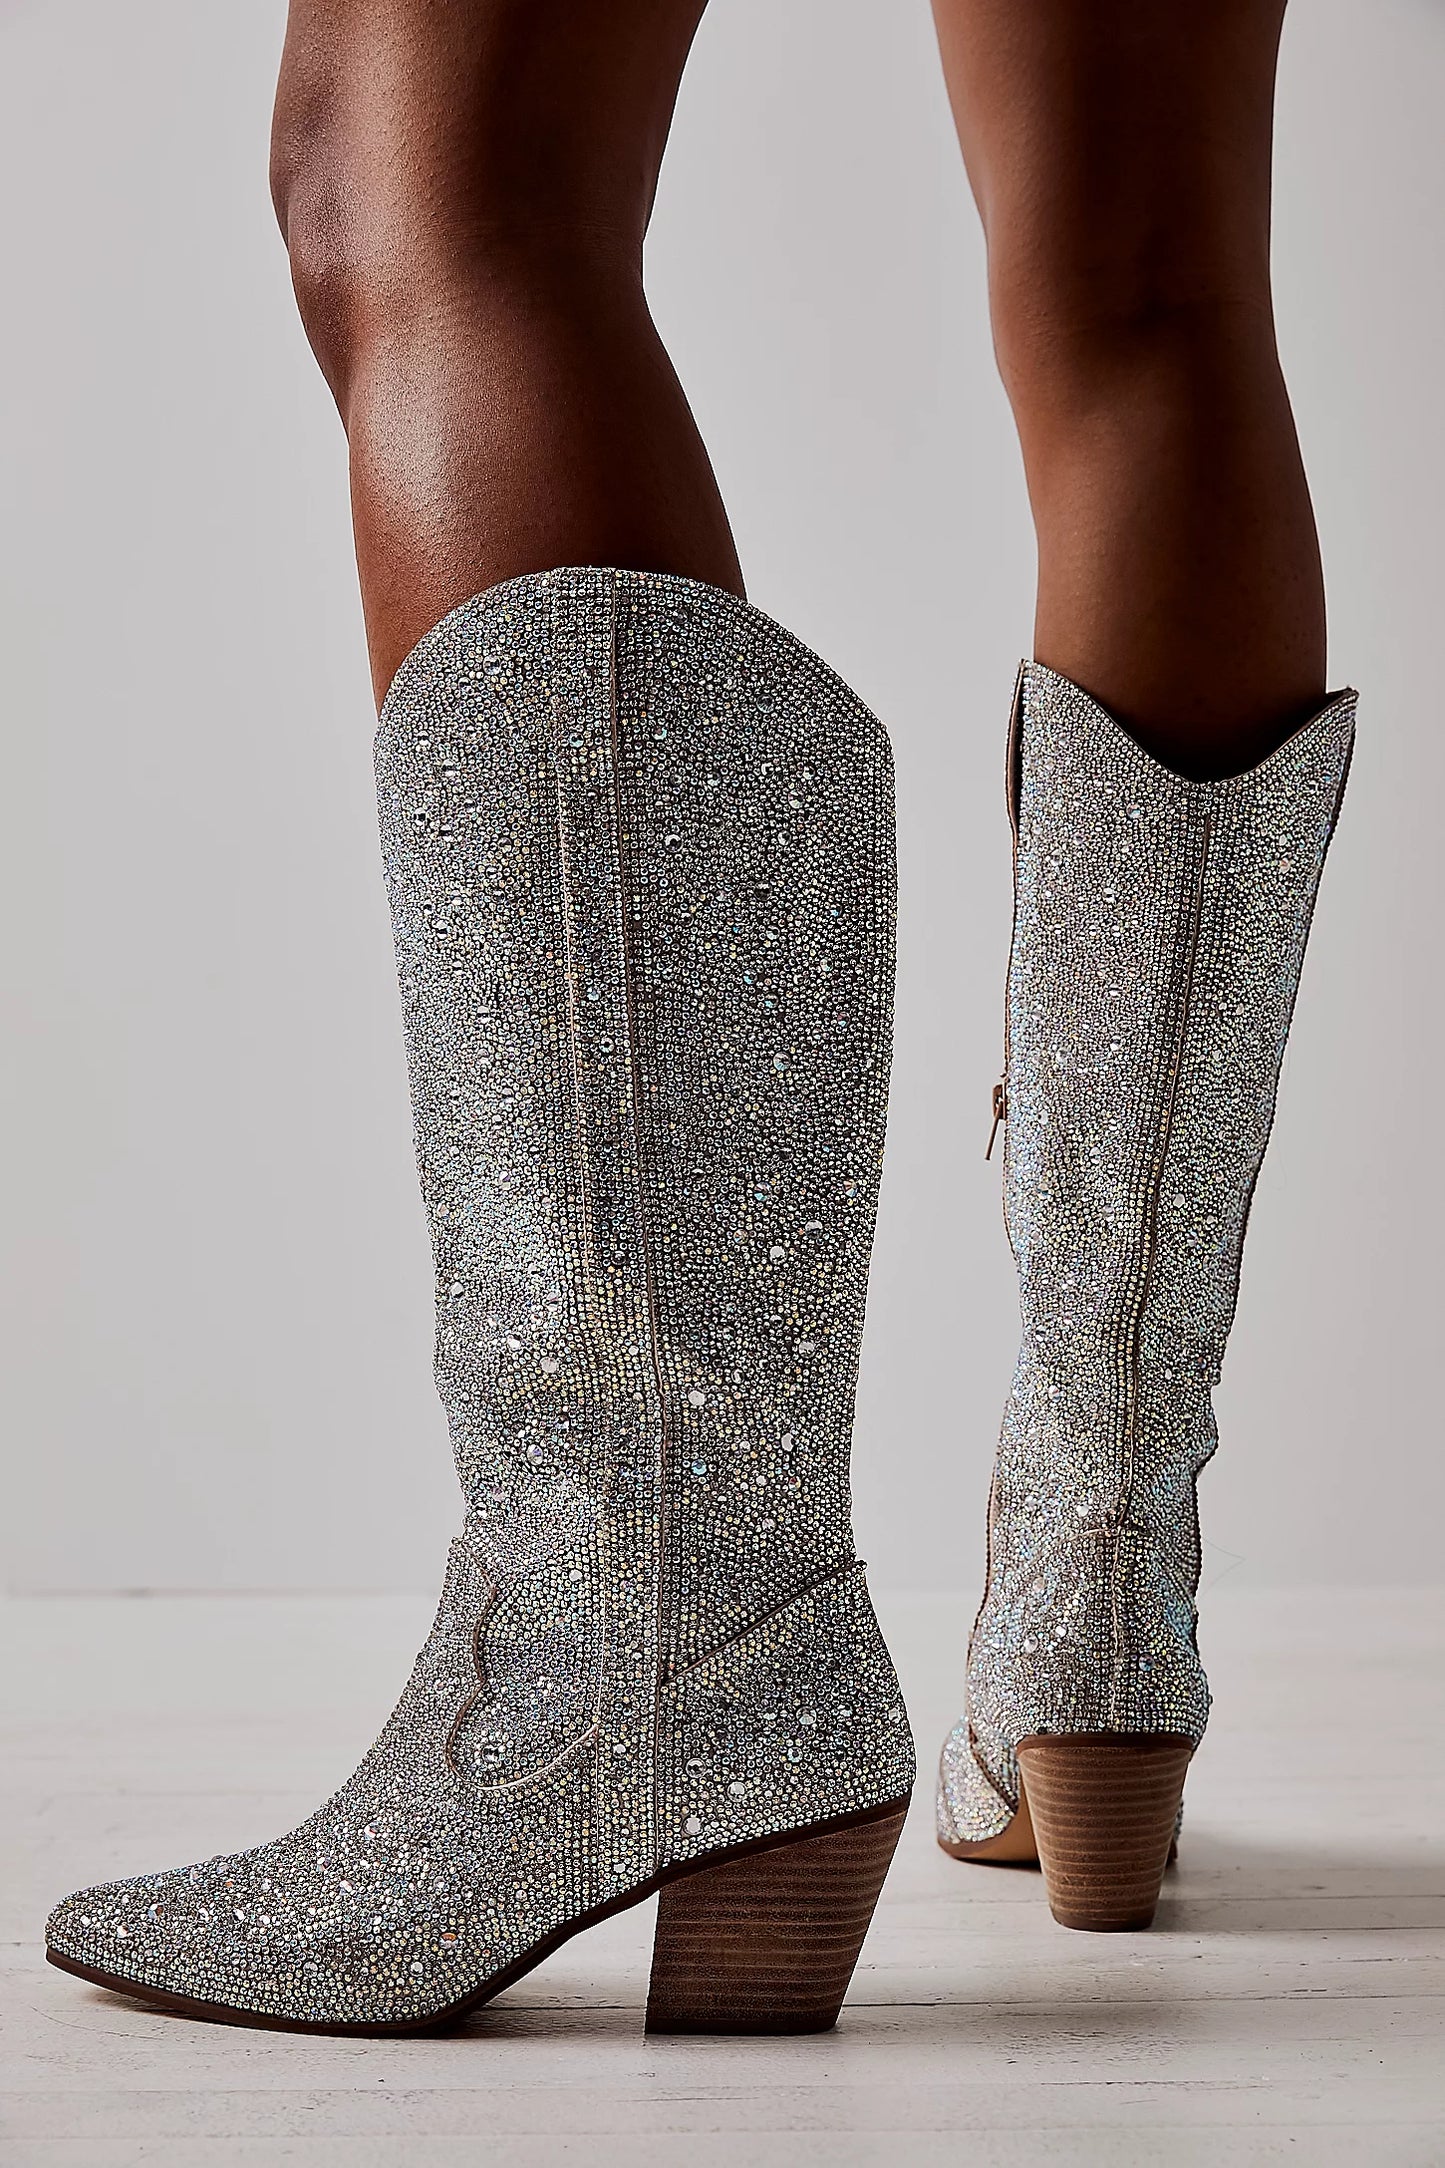 The It Girl Glamour Boots